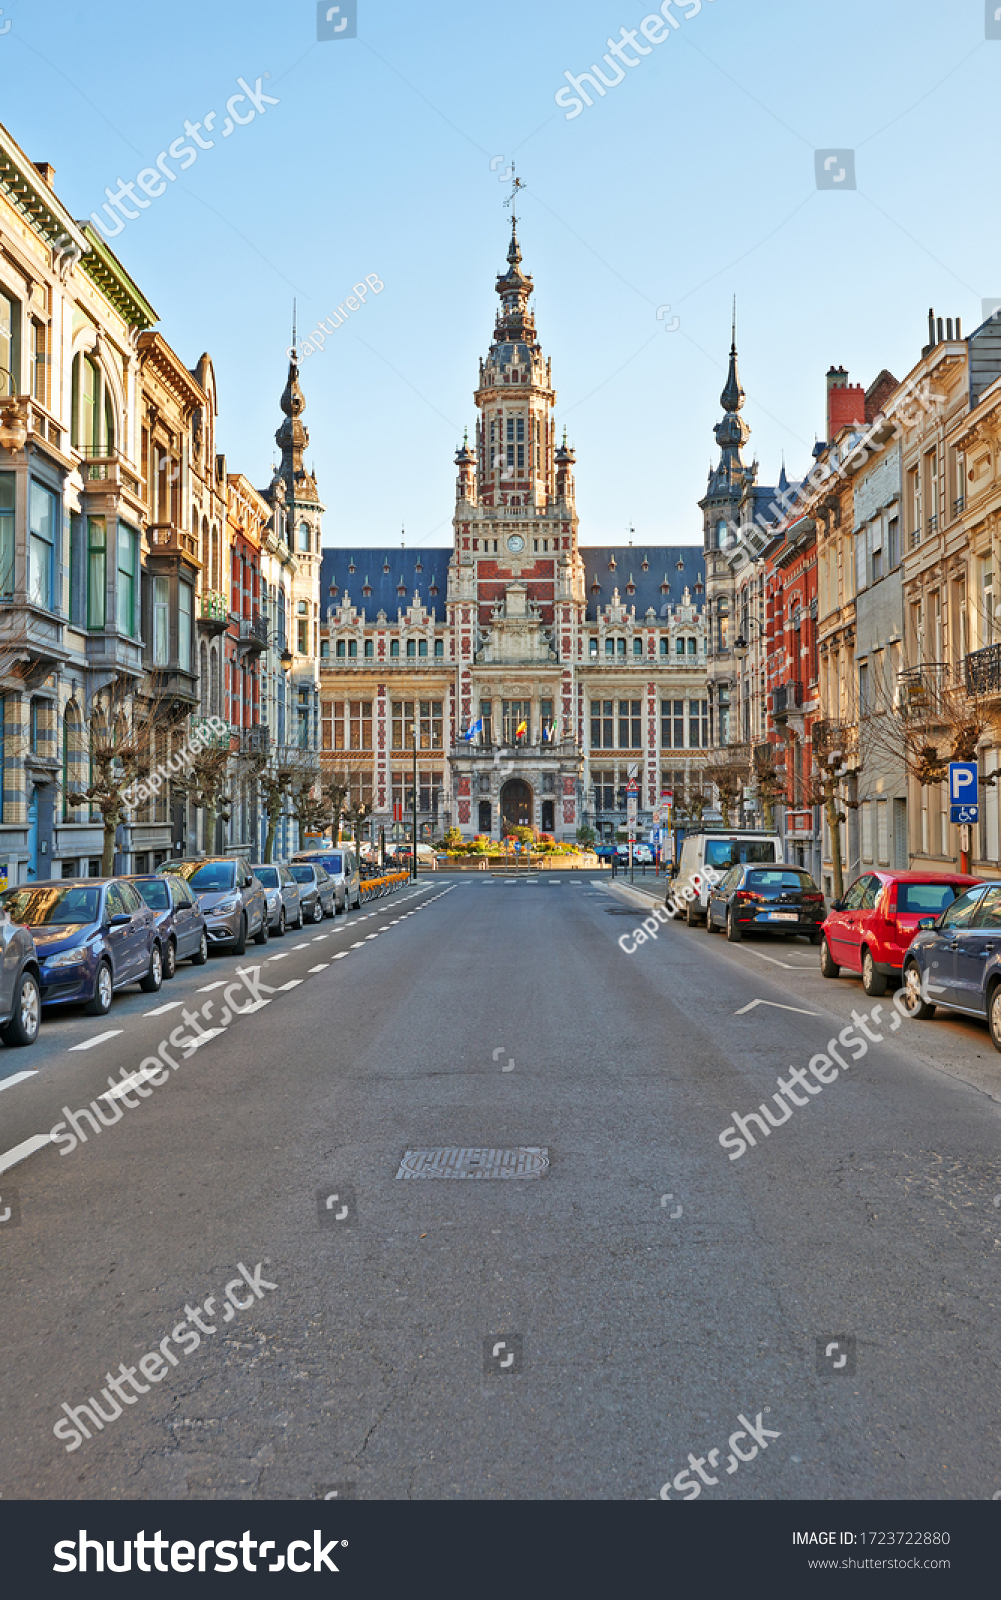 Brussels, Belgium - April 05, 2020: The Royal Saint-Marie street and the communal house at Schaerbeek without any people during the confinement period. #1723722880